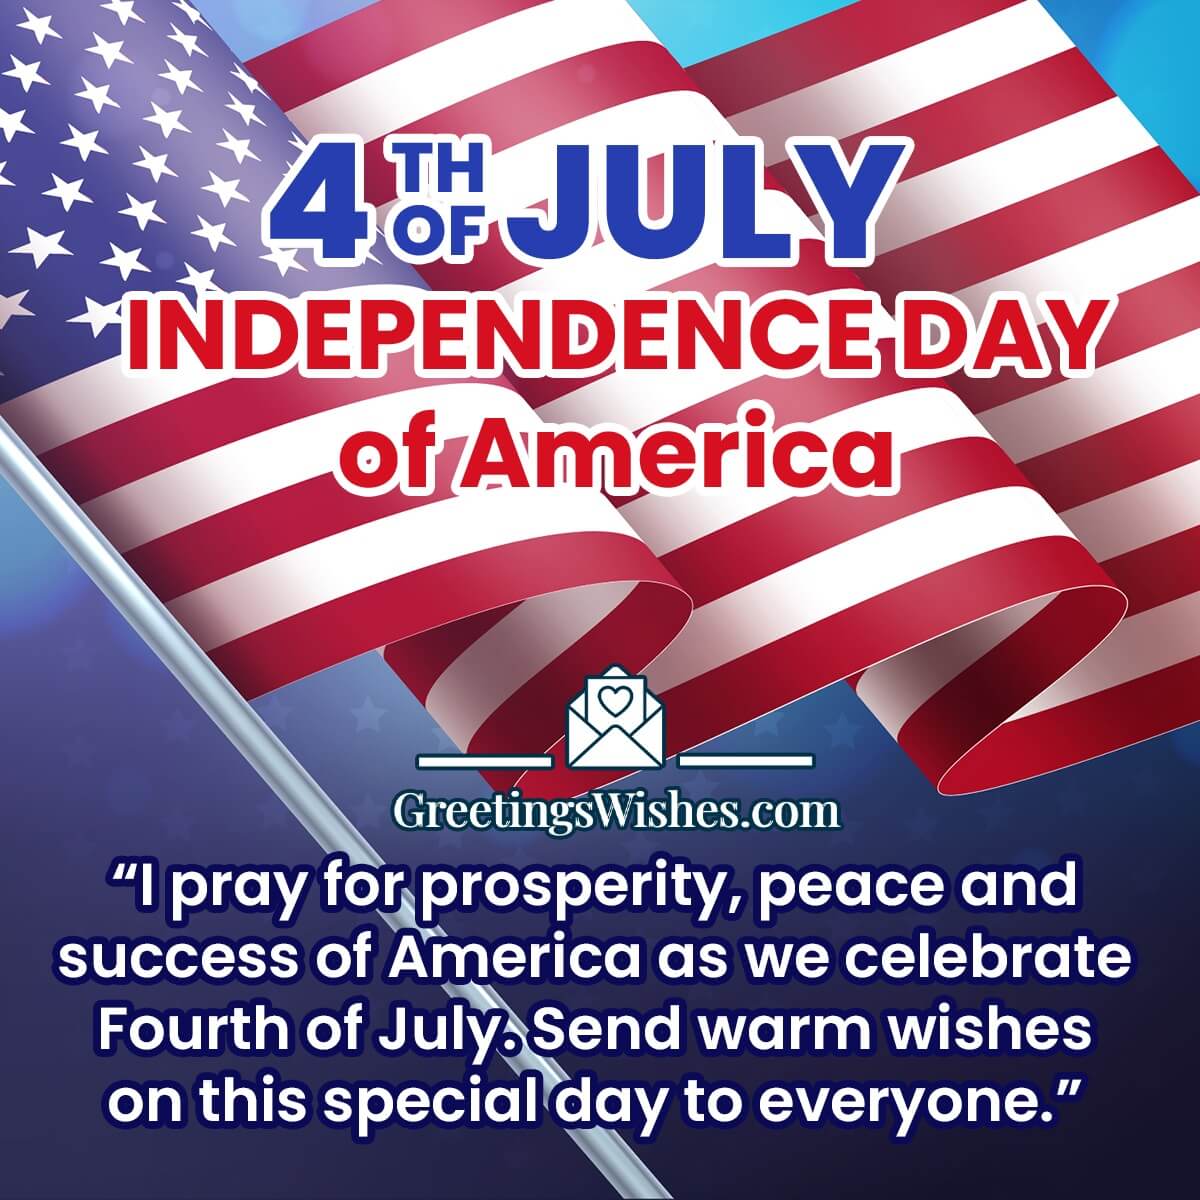 4th Of July Independence Day Wish Image